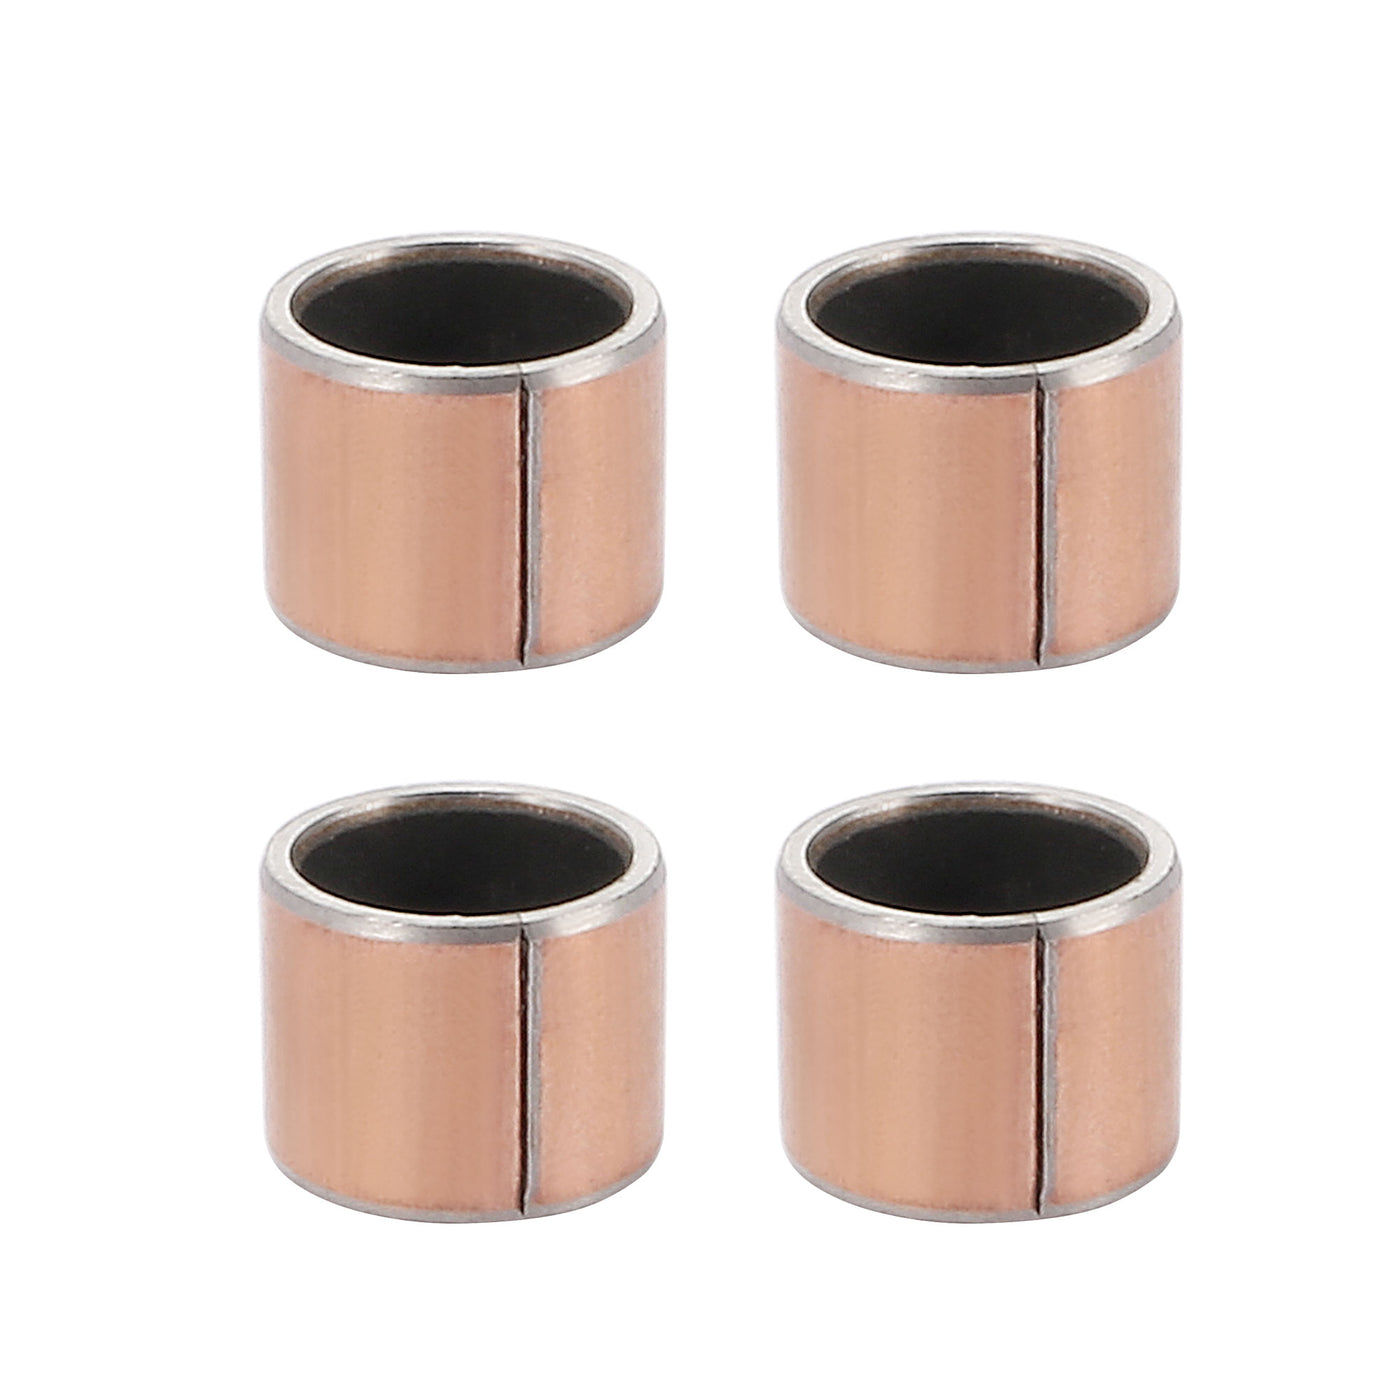 uxcell Uxcell Sleeve (Plain) Bearings 12mm Bore 15mm OD 12mm L Wrapped Oilless Bushings 4pcs